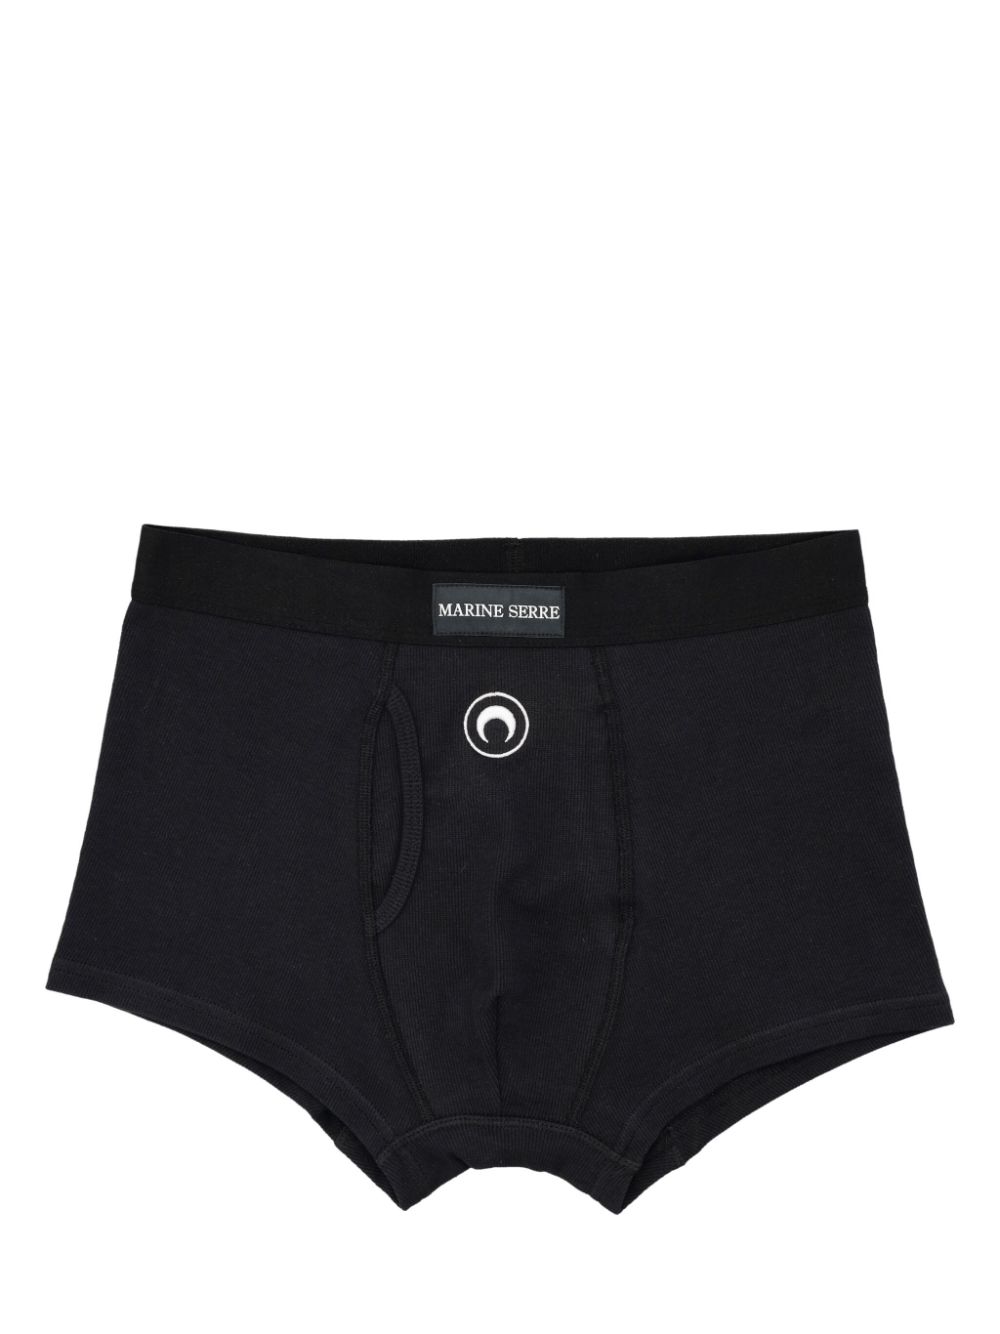 Image 1 of Marine Serre Crescent Moon-embroidered boxers